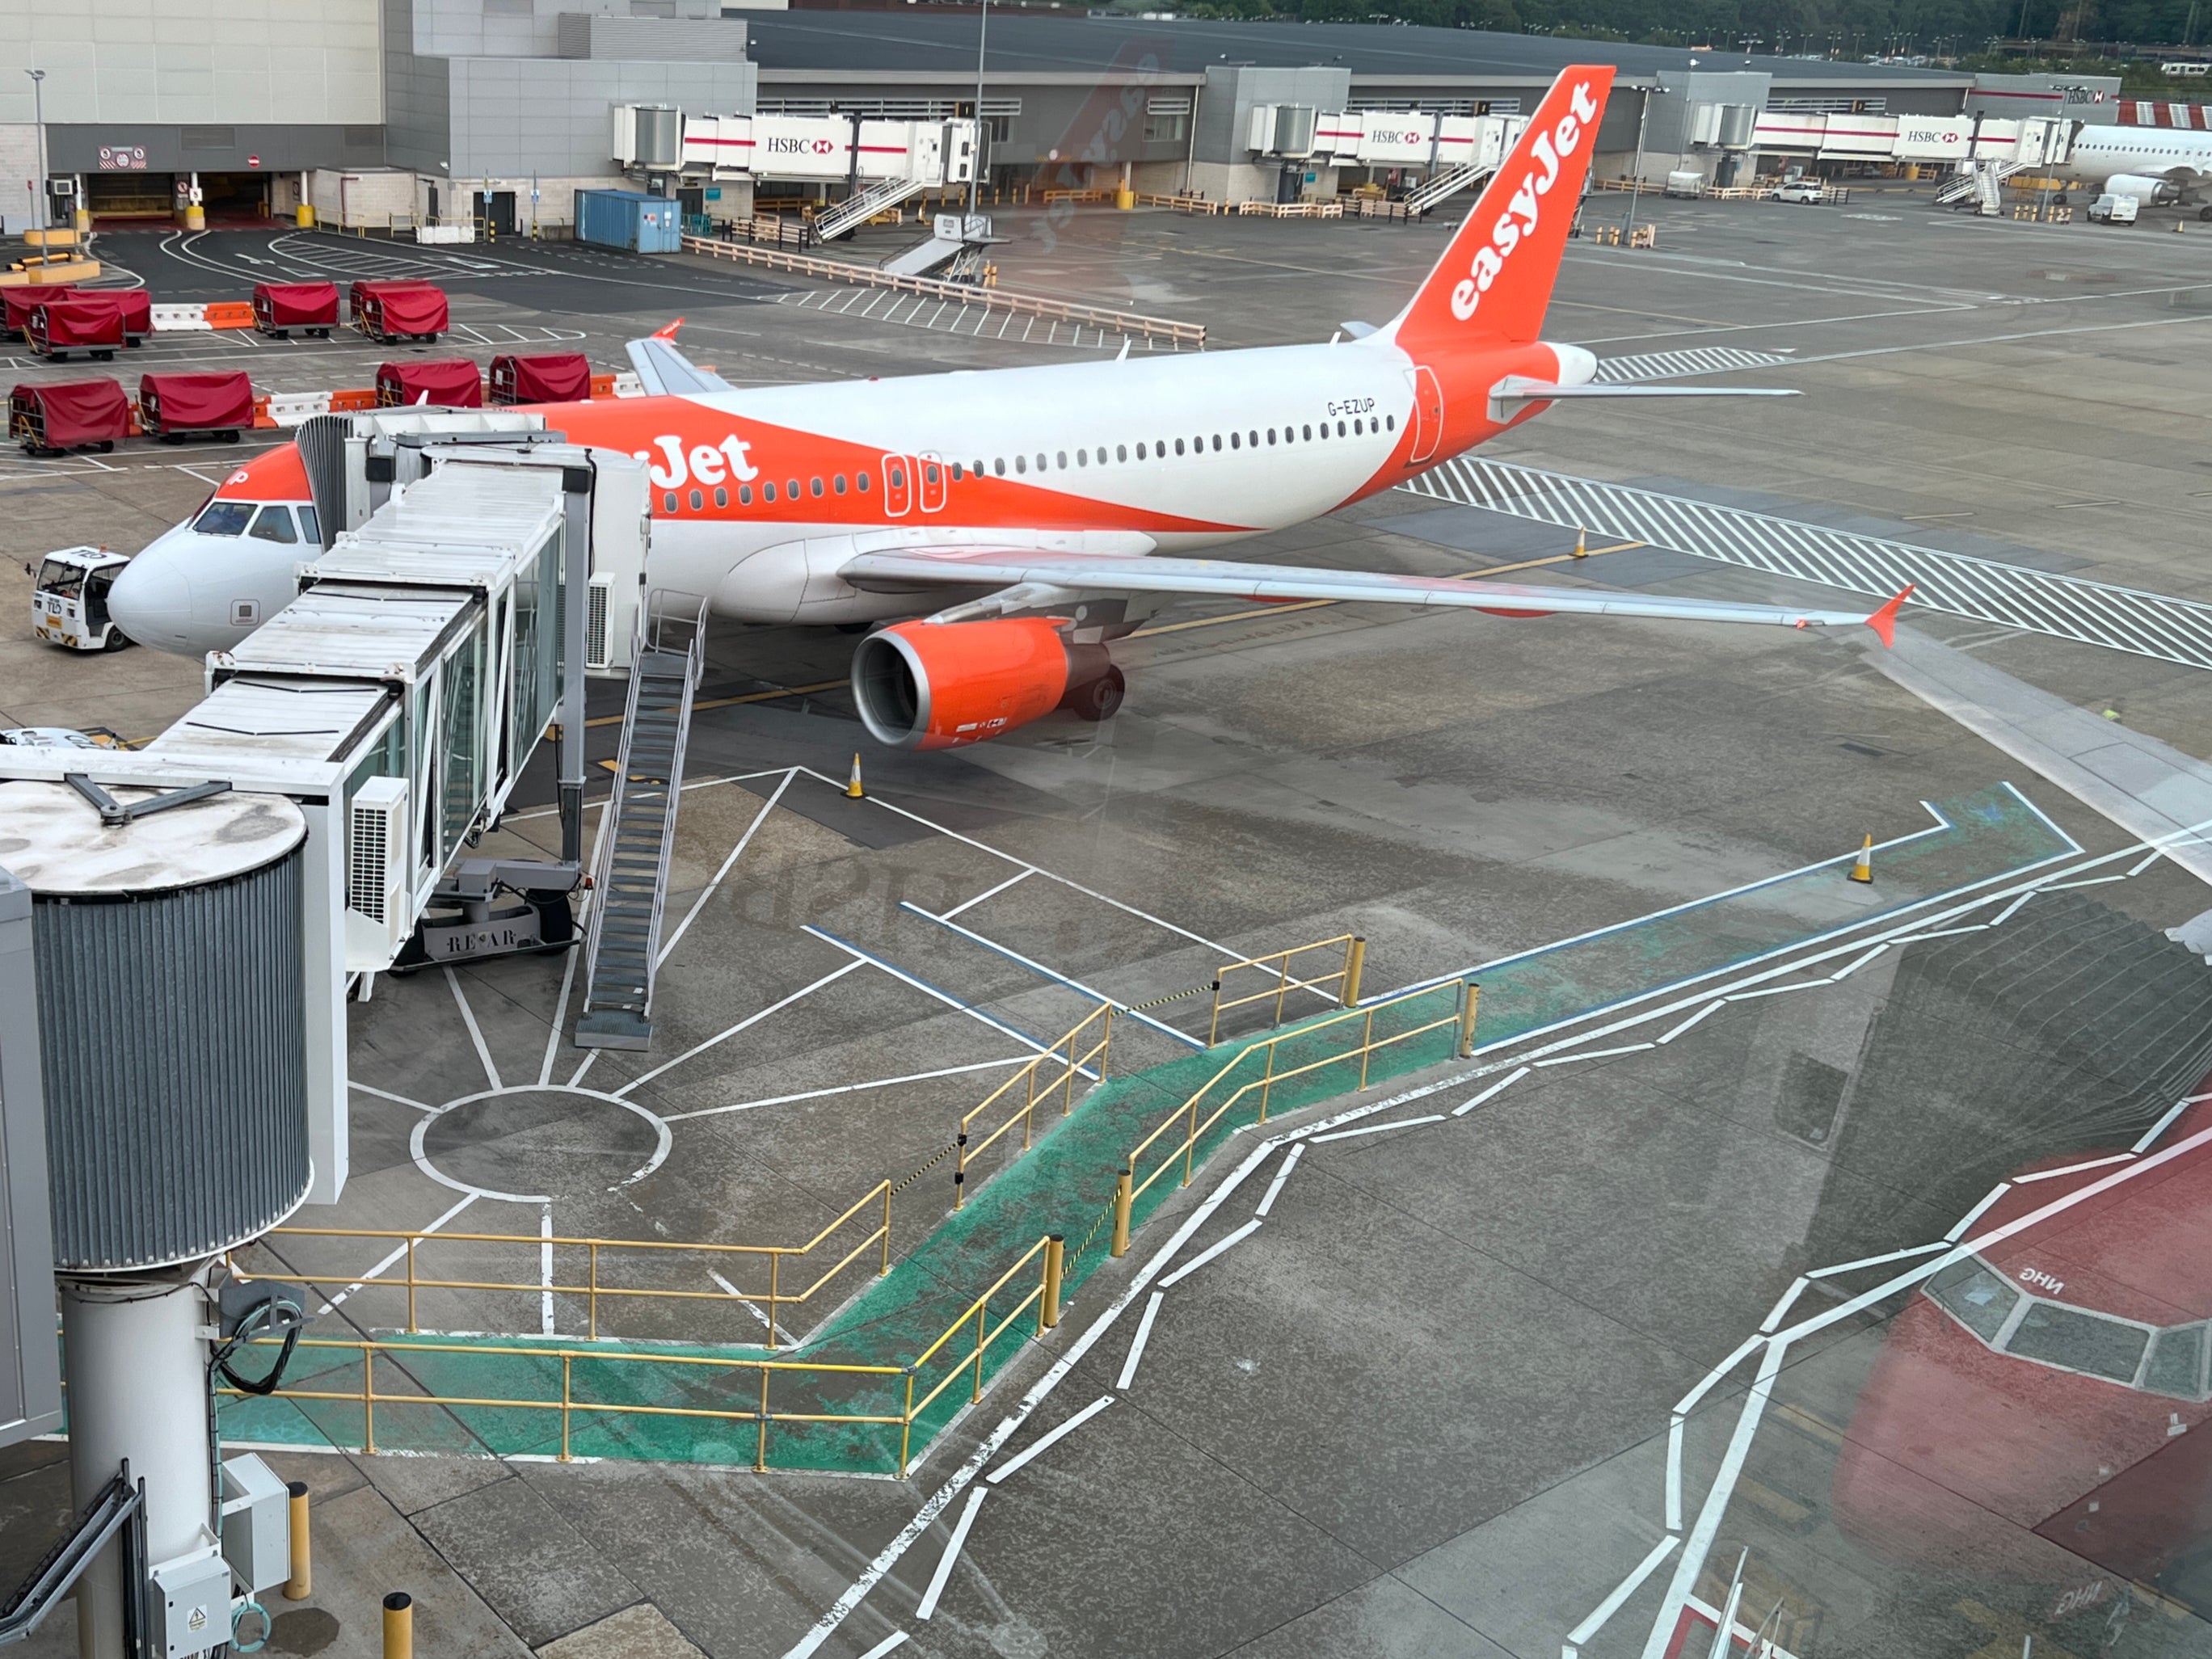 Going places?: an easyJet aircraft at London Gatwick airport